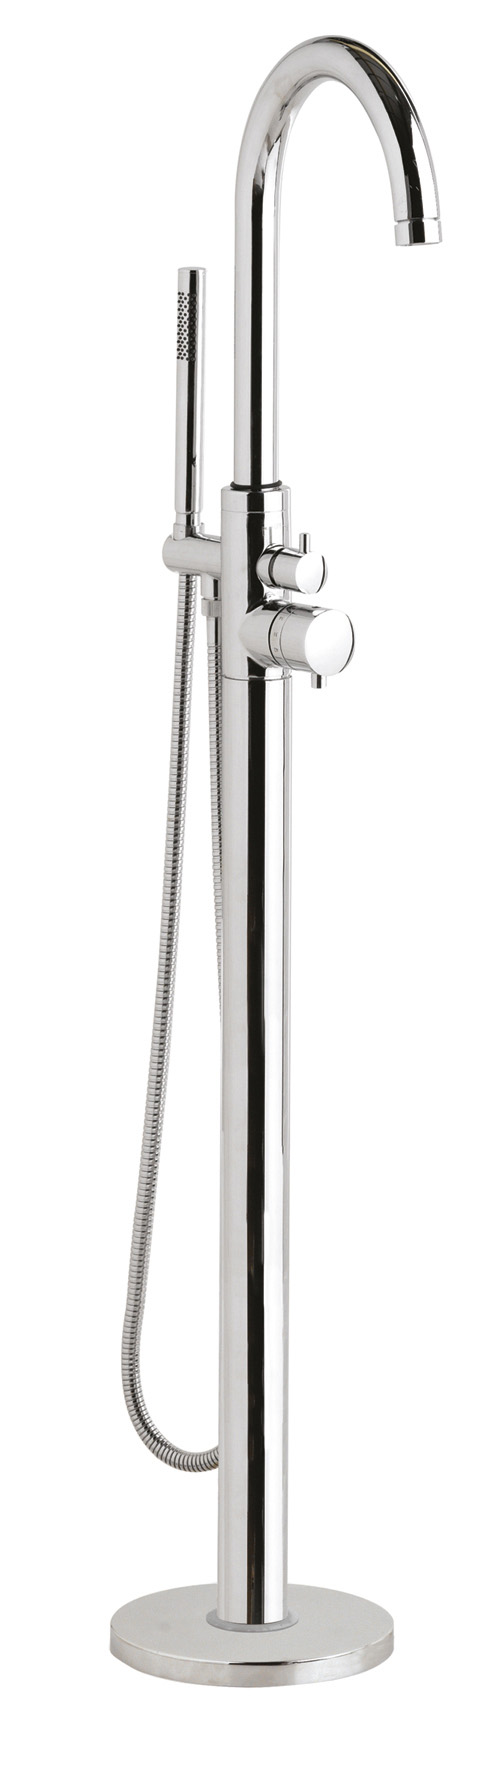 Hudson Reed Thermostatic Floor Standing Bath Shower Mixer PN322 (2373)